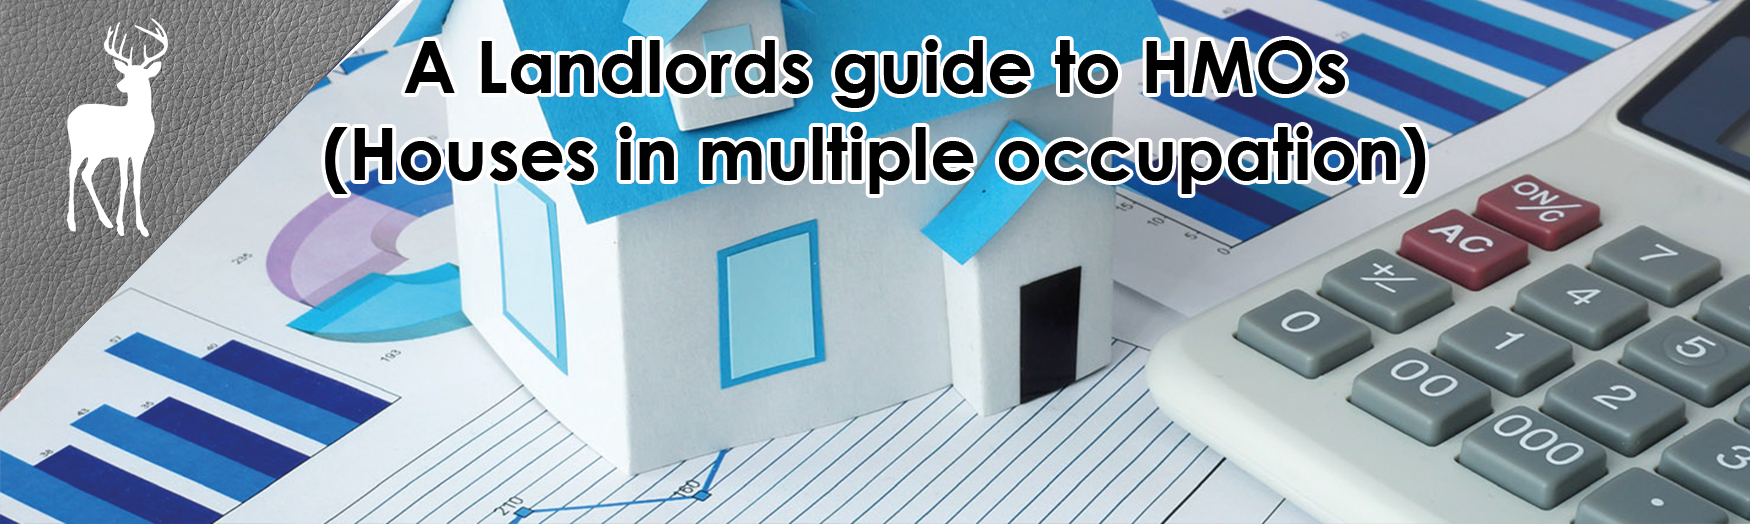 A Landlords guide to HMOs (Houses in multiple occupation)